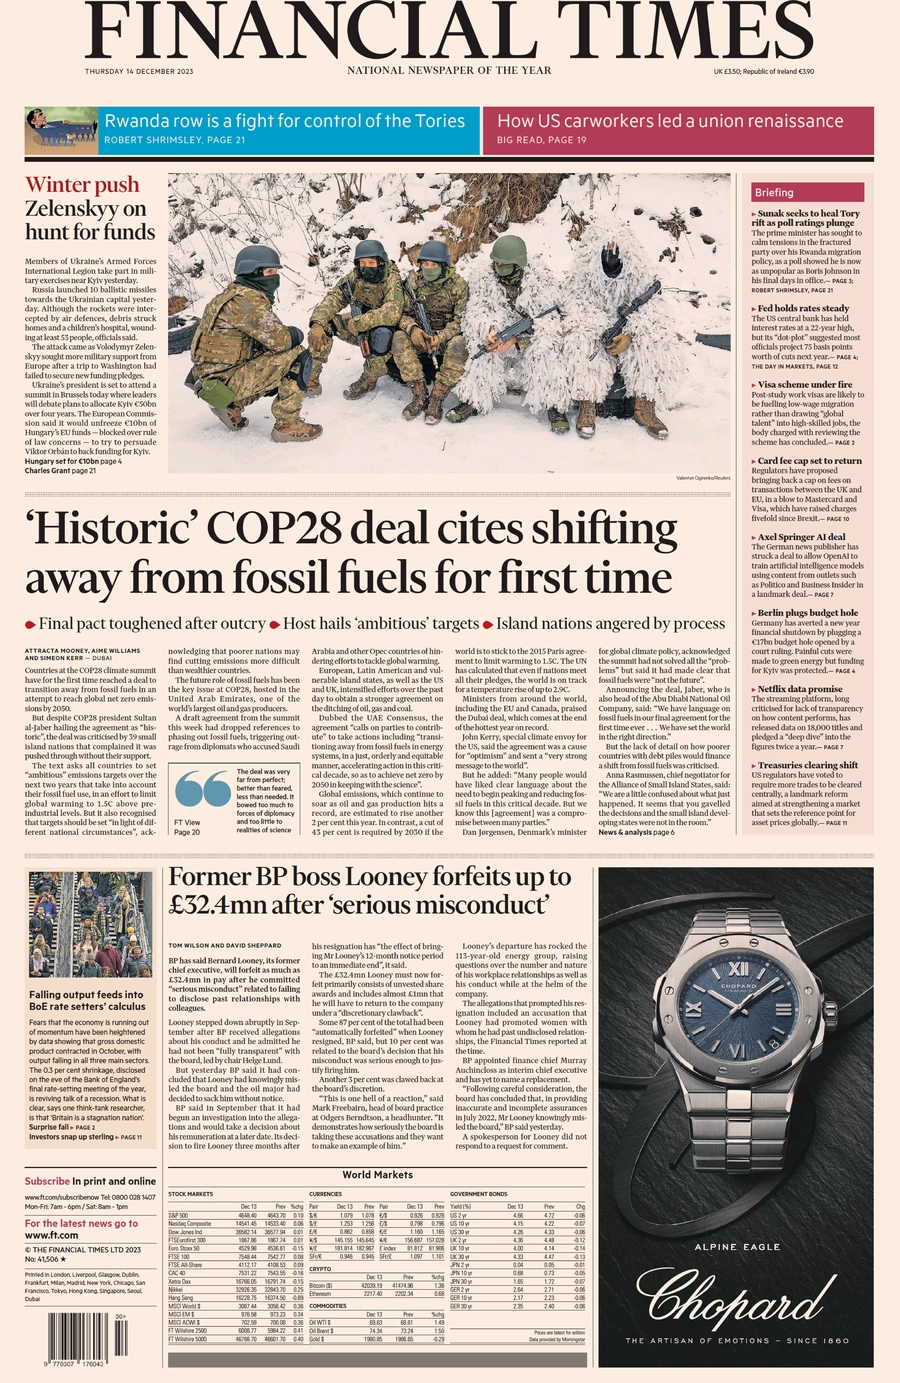 Financial Times - ‘Historic’ Cop28 deal cites shifting away from fossil fuels for first time